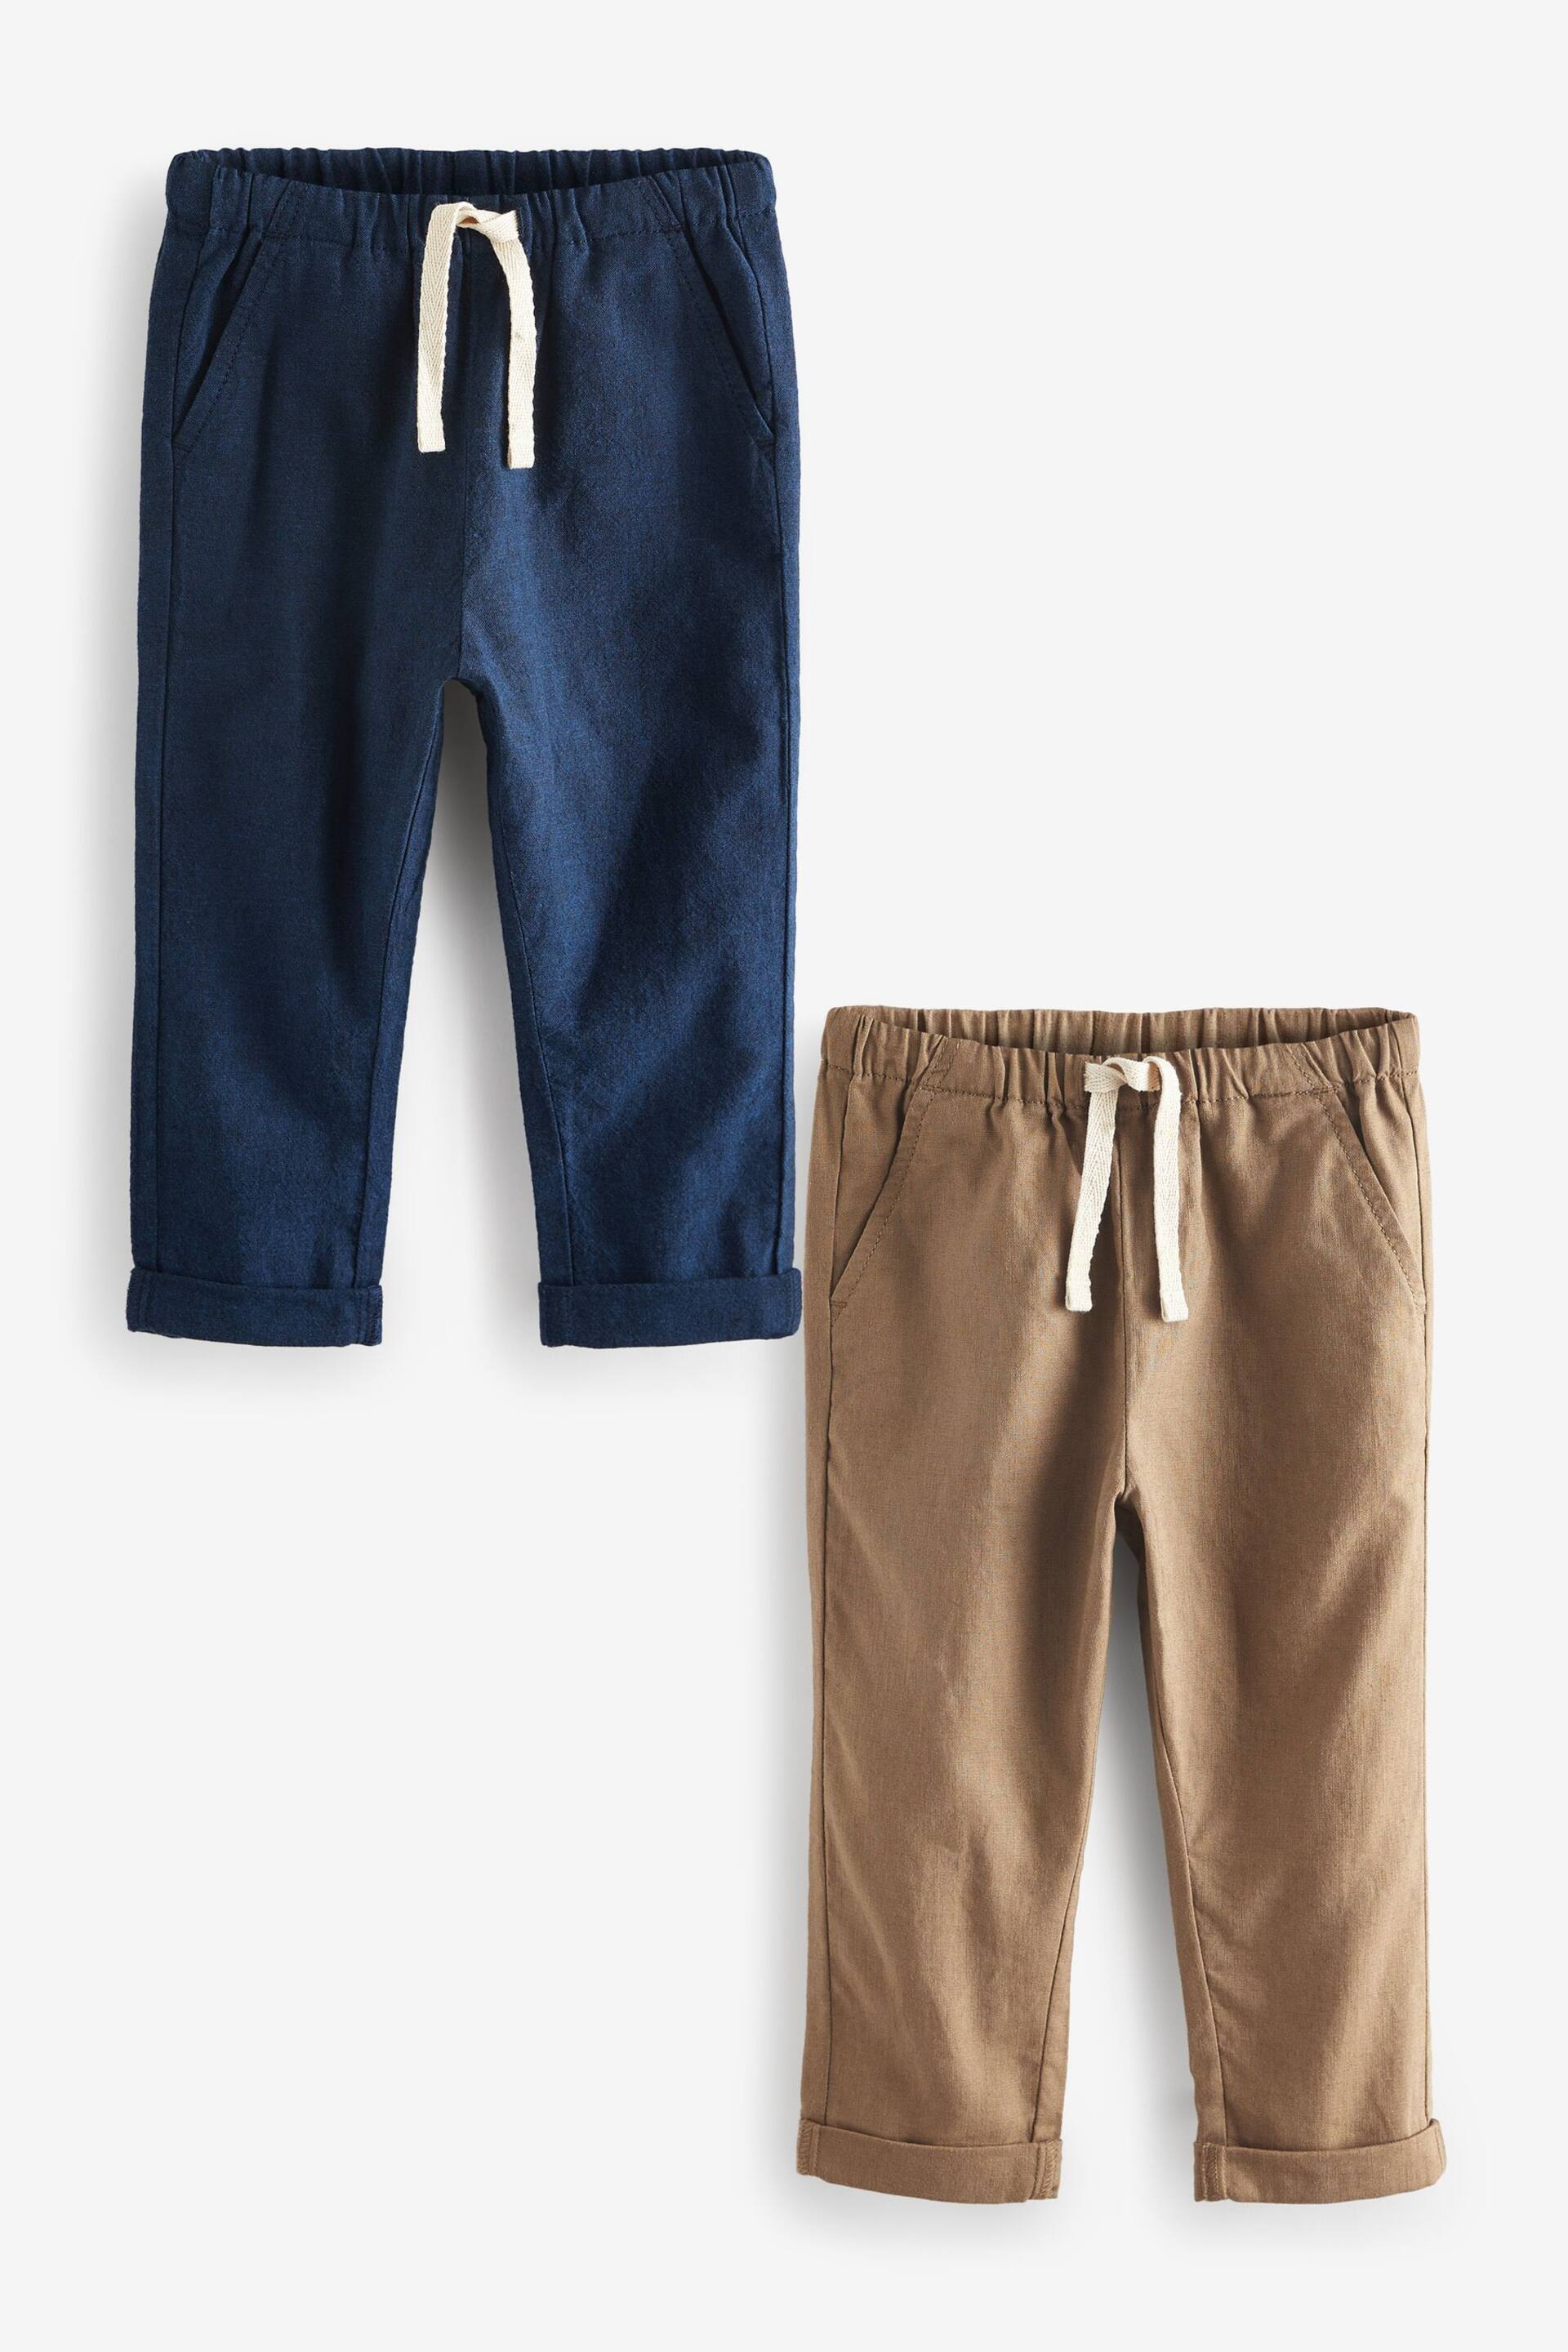 Navy/Tan 2 Pack Linen Blend Pull On Trousers (3mths-7yrs) - Image 1 of 5